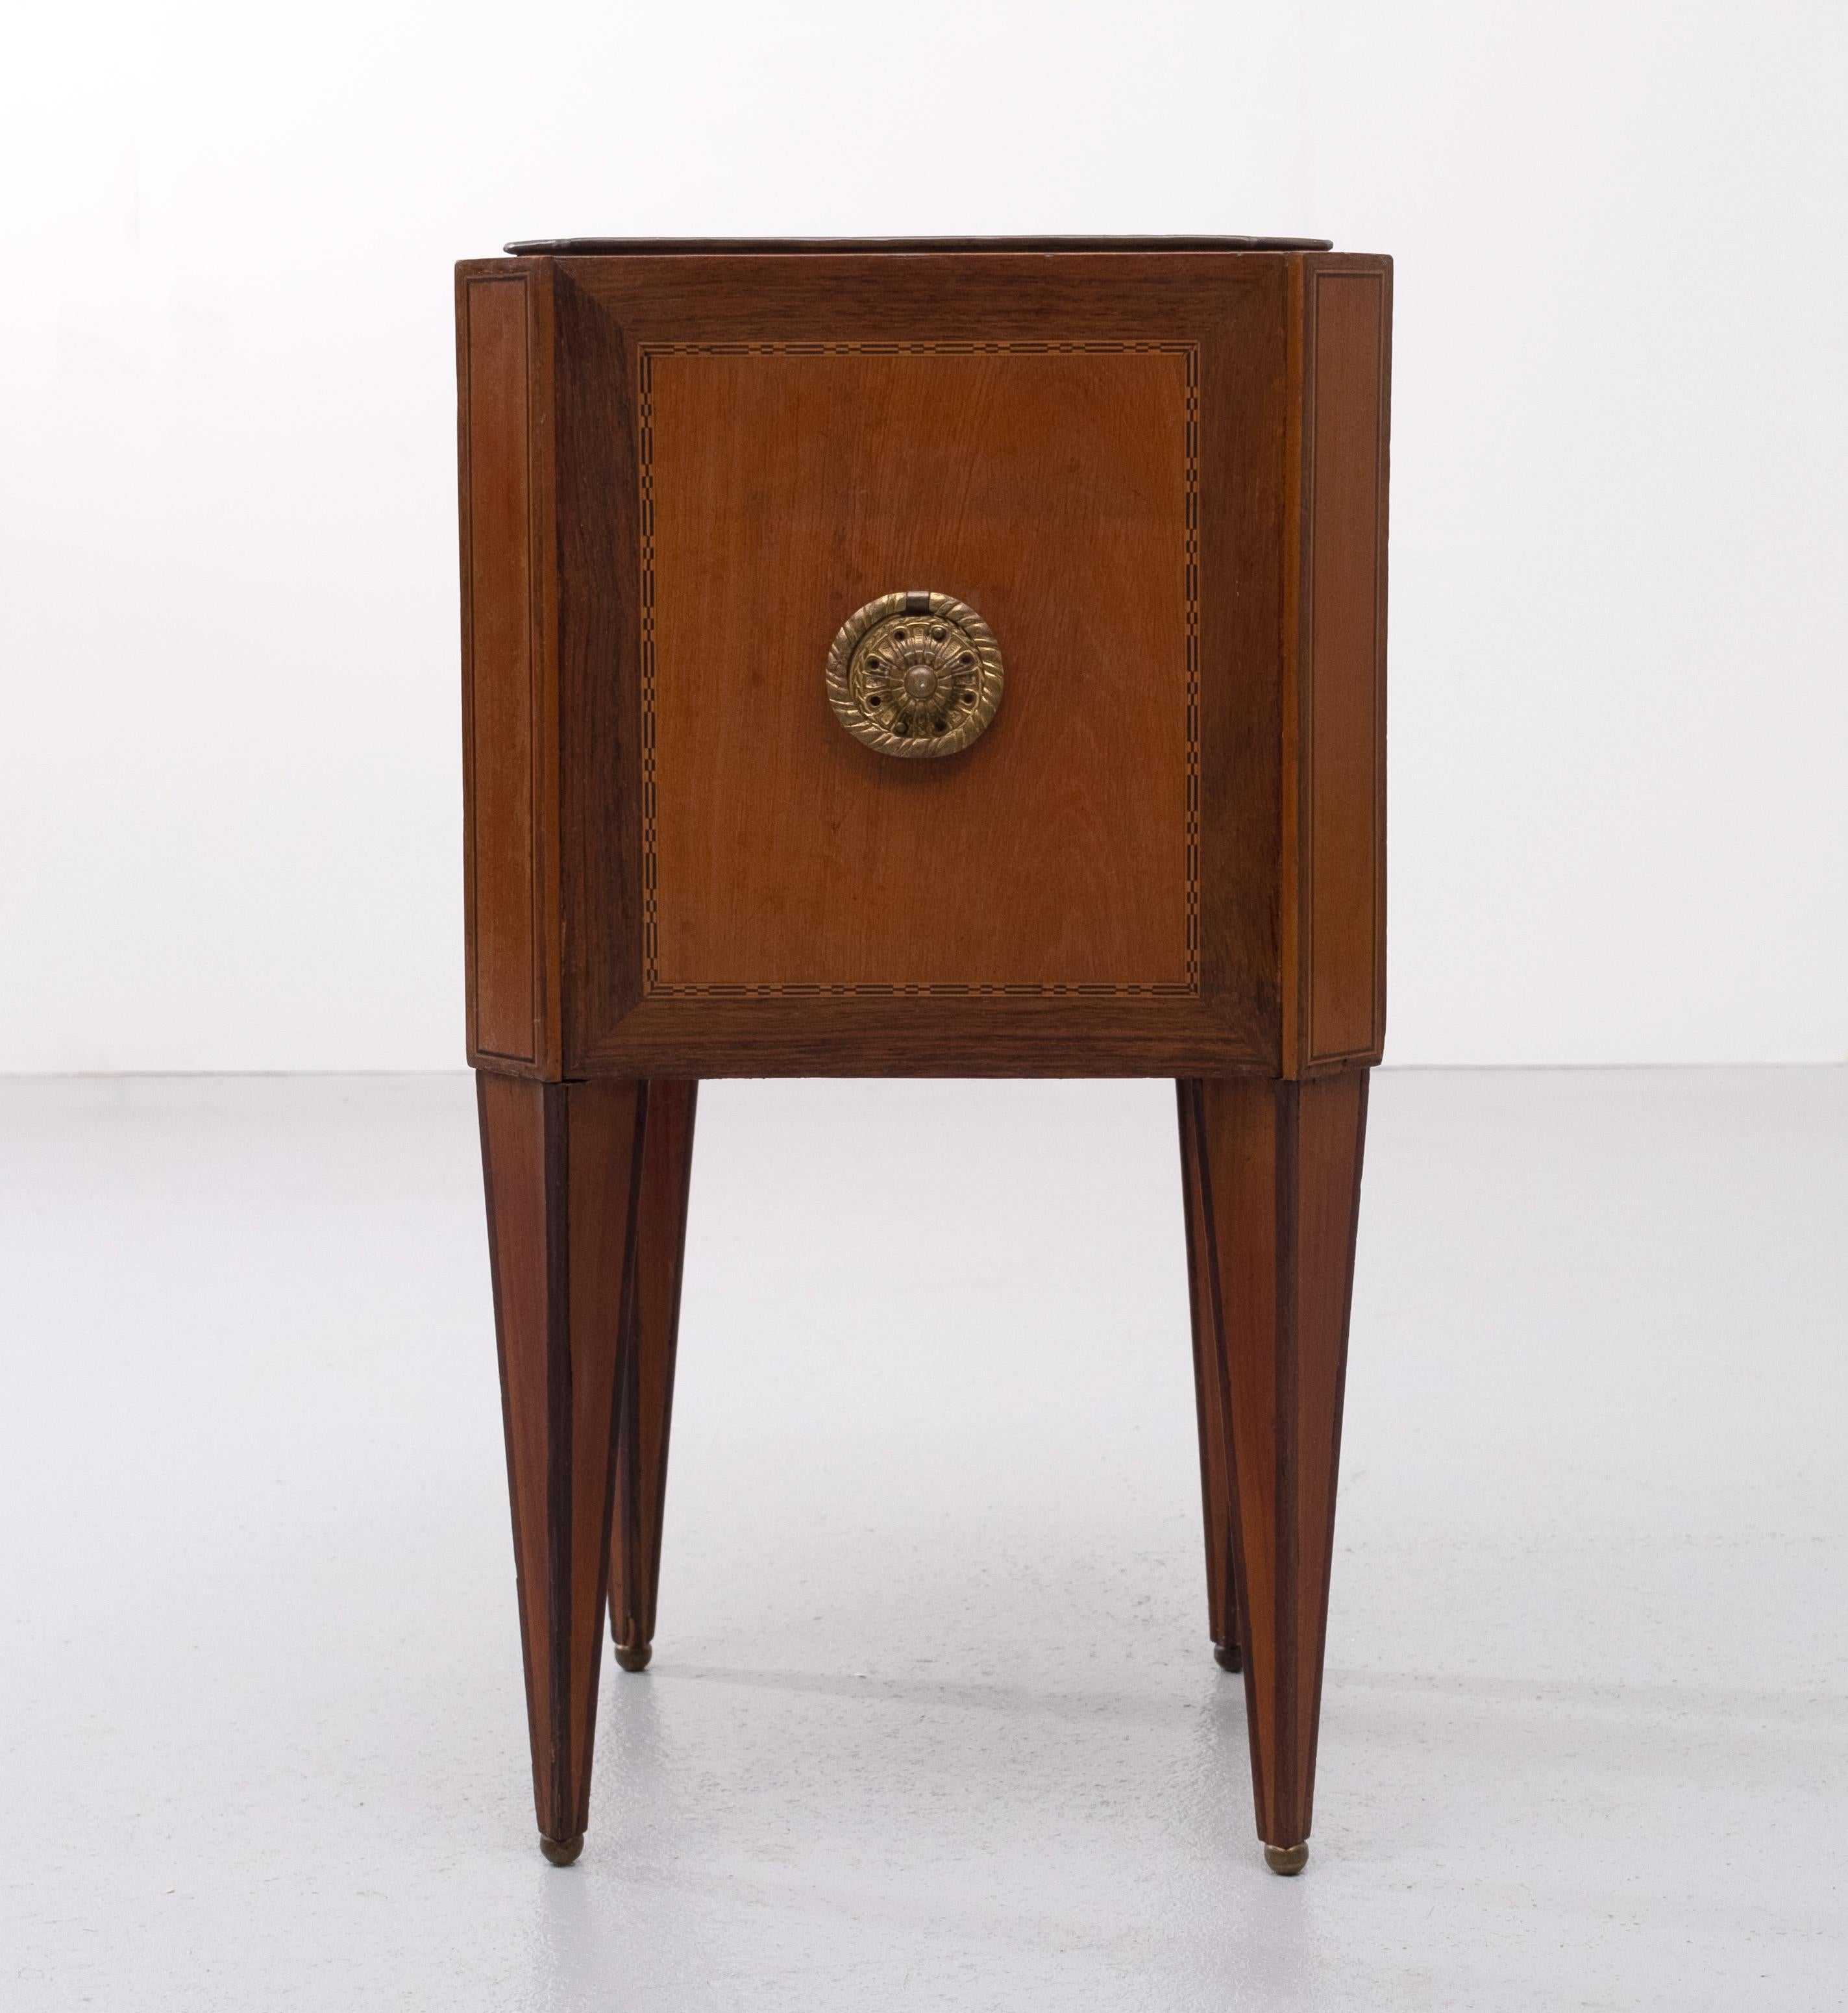 Circa 1850, neat-sized Dutch inlaid mahogany jardinière. The square top with canted corners, containing its original brass liner. The sides with chevron inlay, banding, shell inlays, and circular Brass ring handles. Supported on square, tapering,